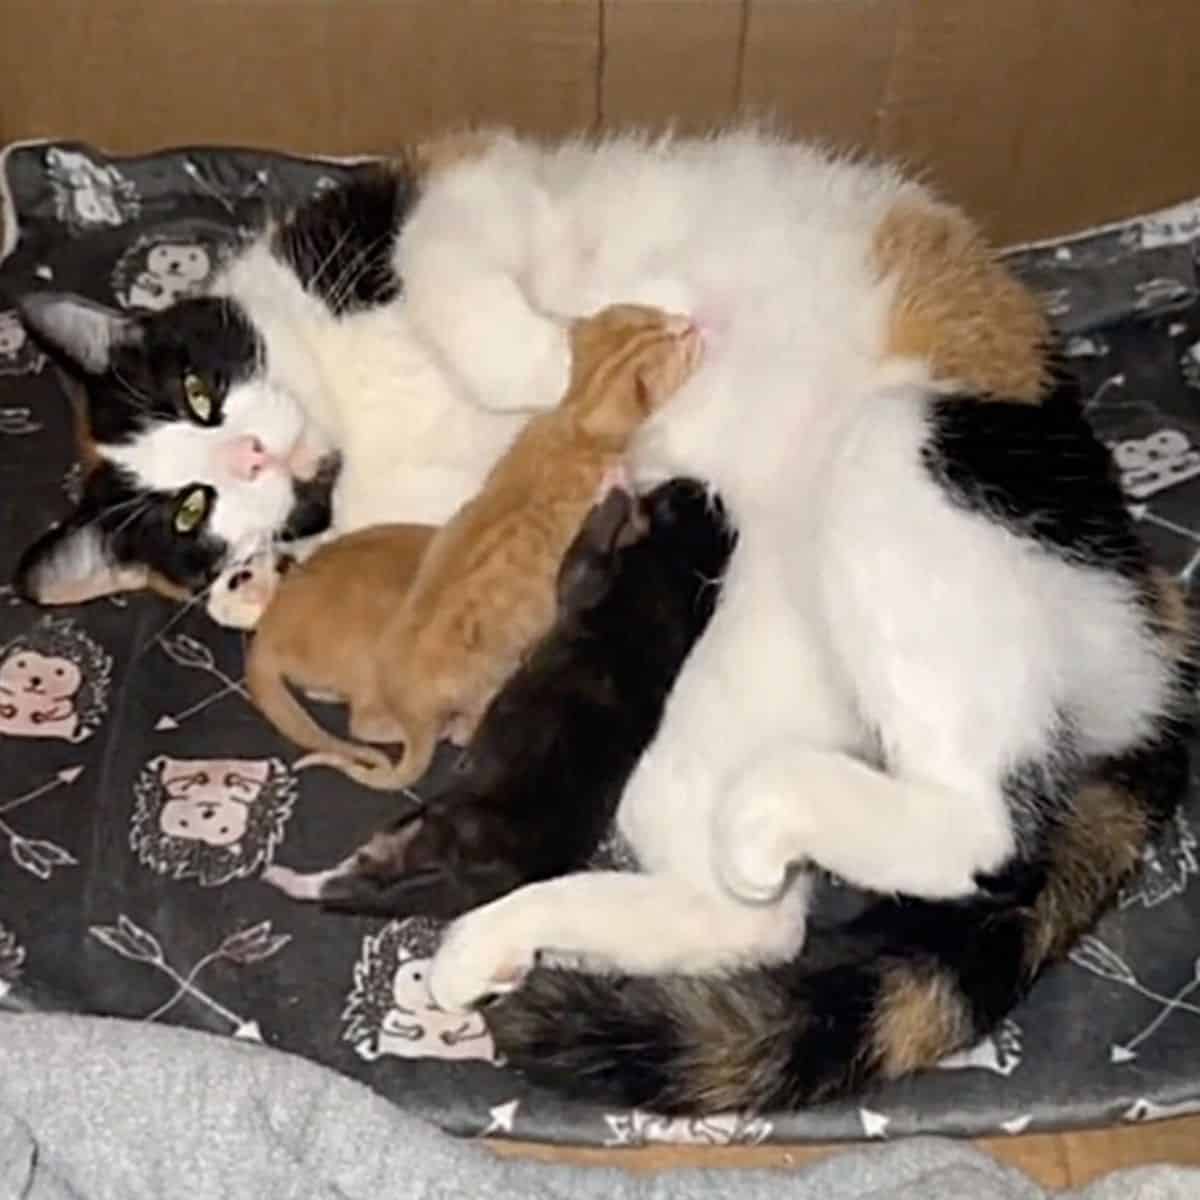 the cat is lying on the mat while the kittens are leaning on it